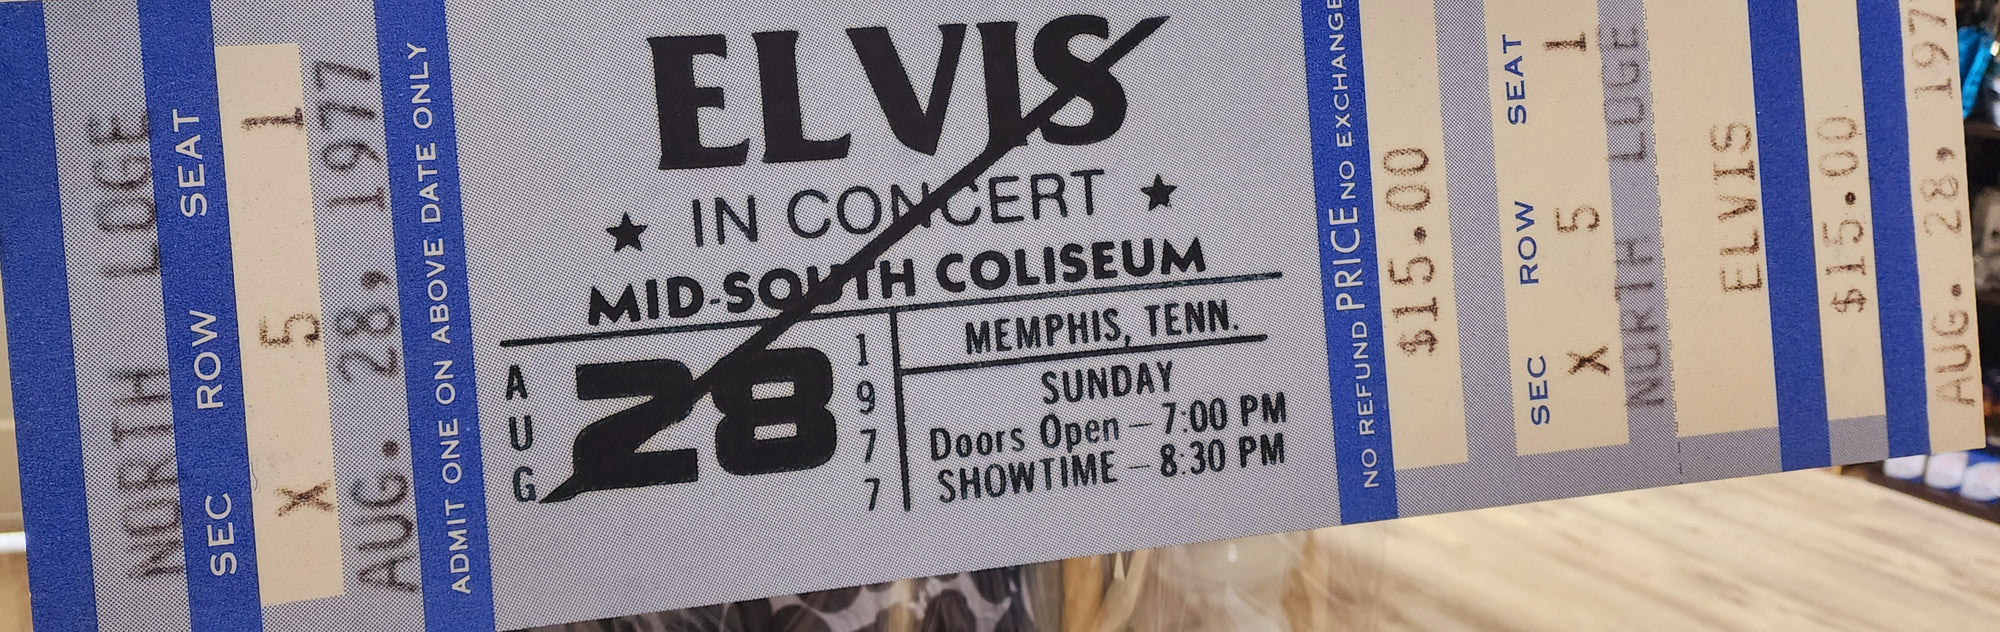 ELVIS TICKET Reproduction by Ron Olson